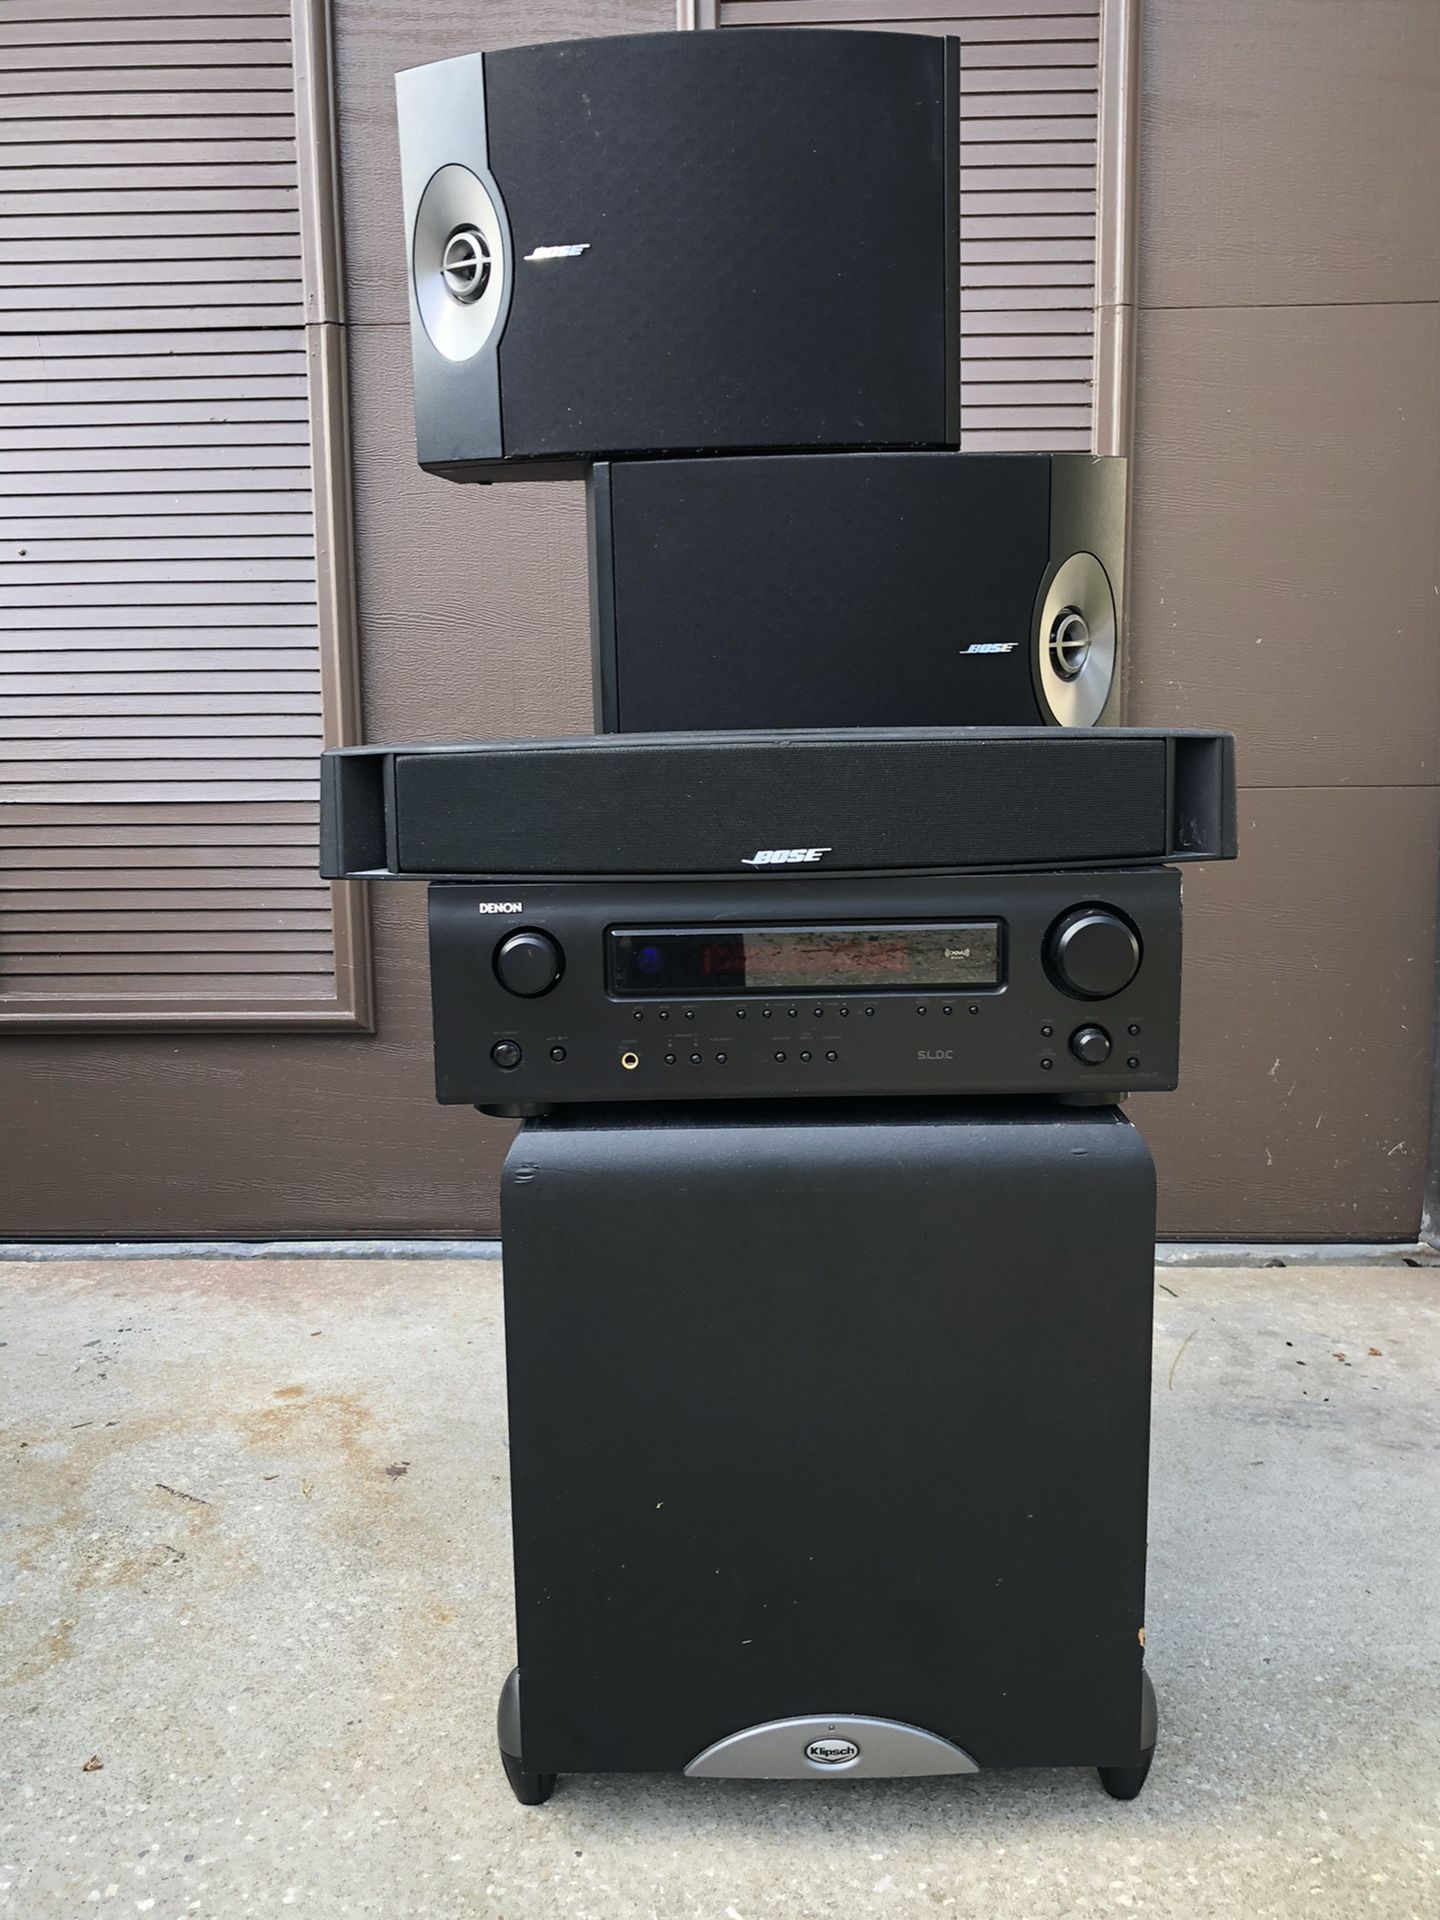 BOSE Speakers with DENAN Stereo Receiver